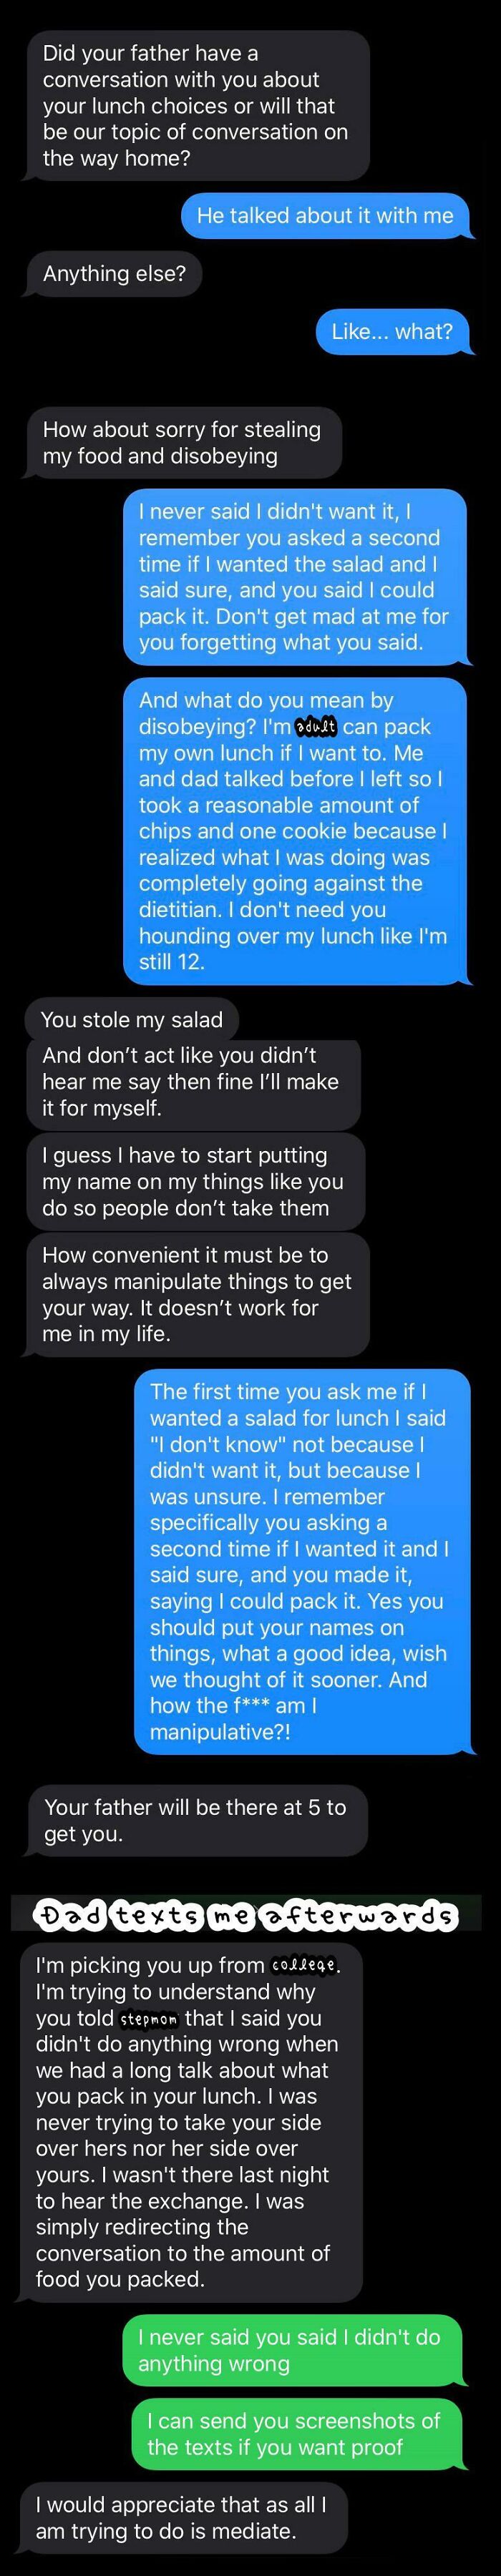 Conversation With Stepmom About Me Packing Lunches, Devolved Pretty Quickly. For Context, I Go To College, And Mostly Pack My Lunches When I Go To On-Campus Classes